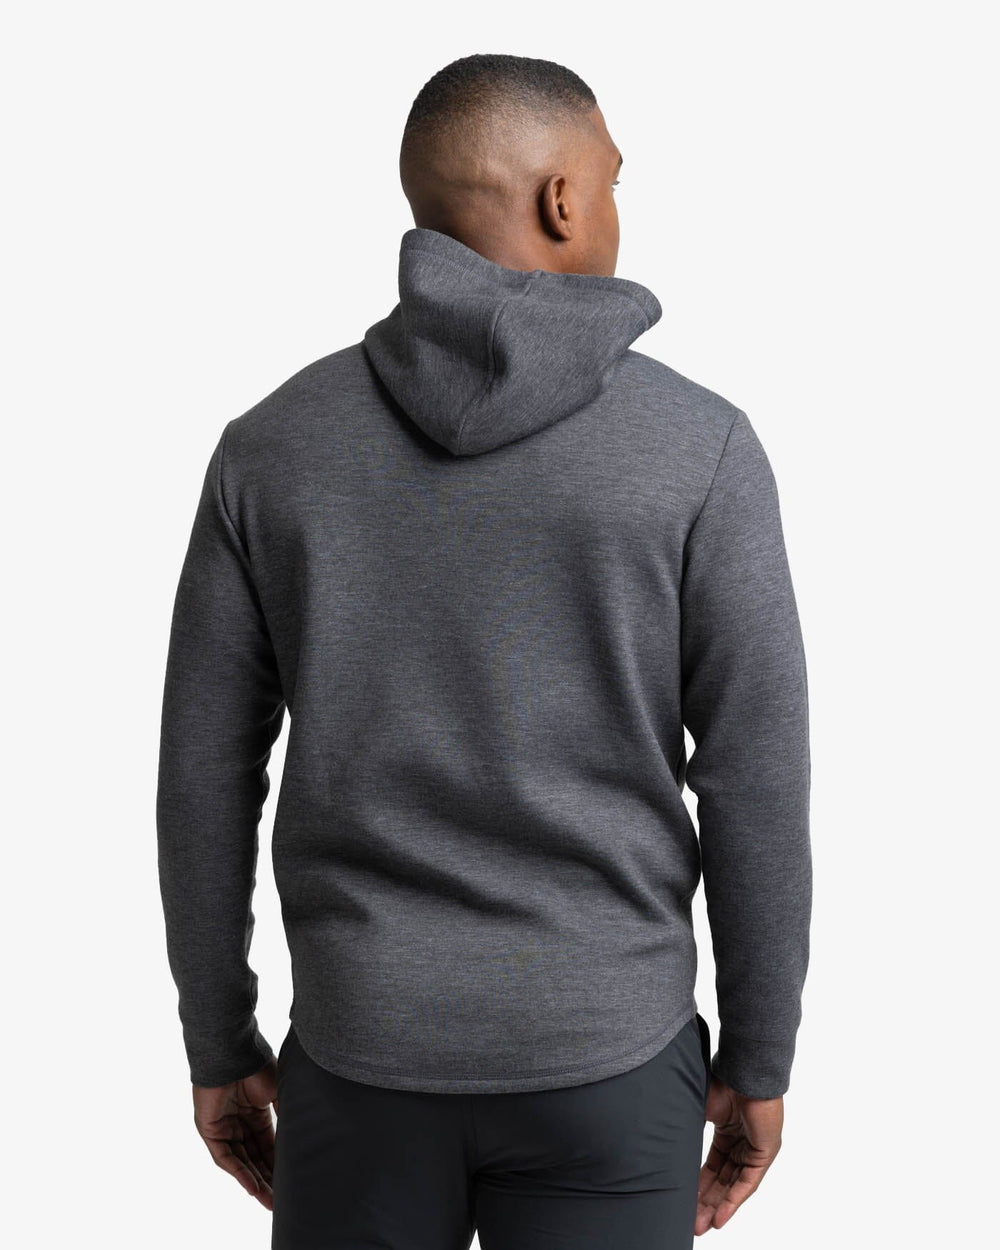 The back view of the Southern Tide Stratford Heather Interlock Hoodie by Southern Tide - Heather Caviar Black